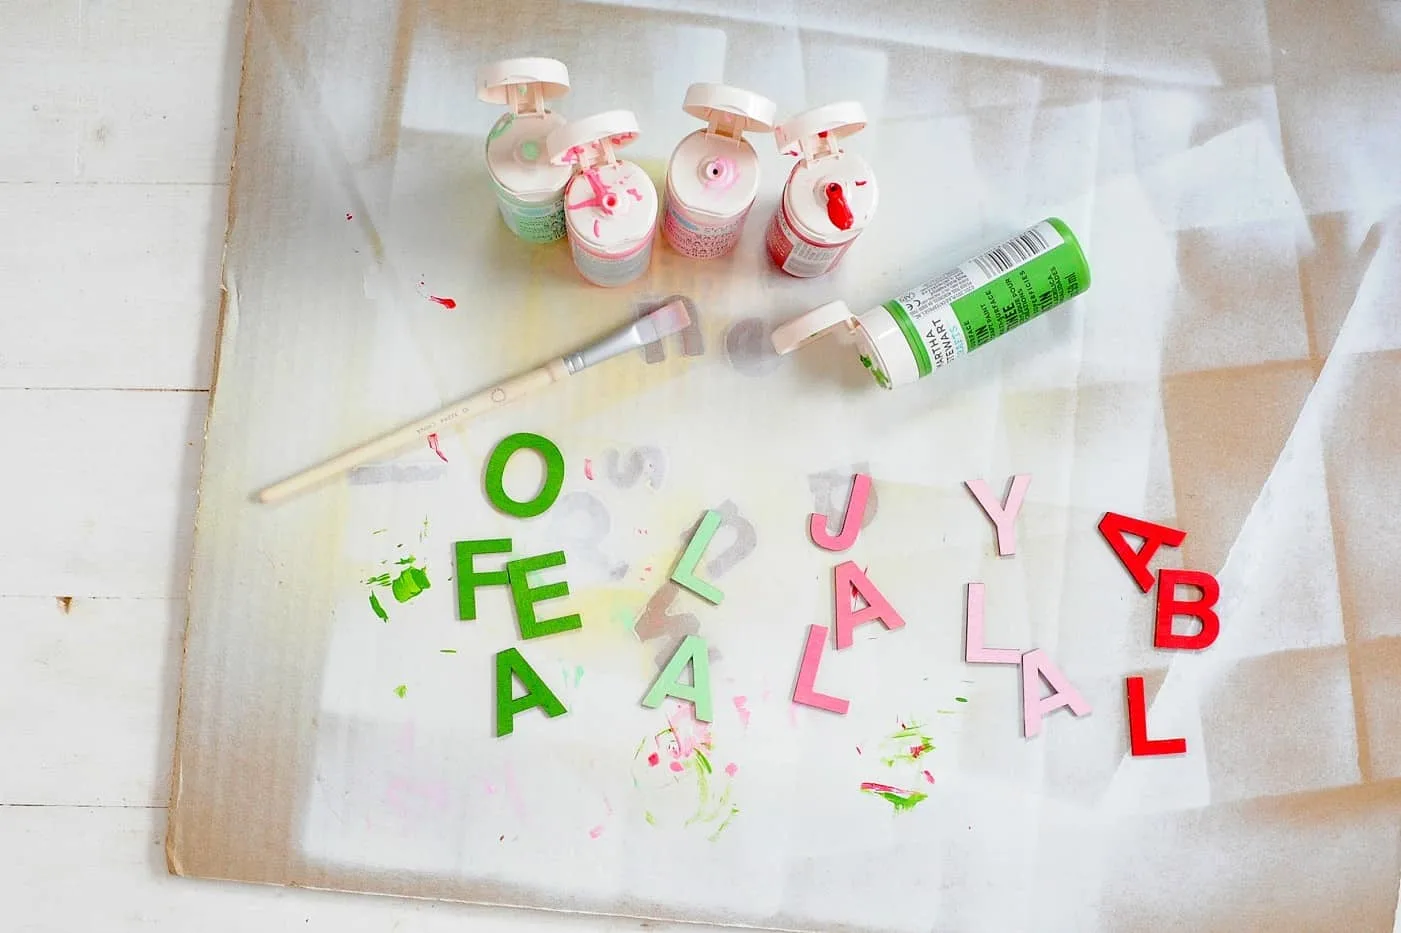 Wood letters painted in green, pink, and red laying on a work surface